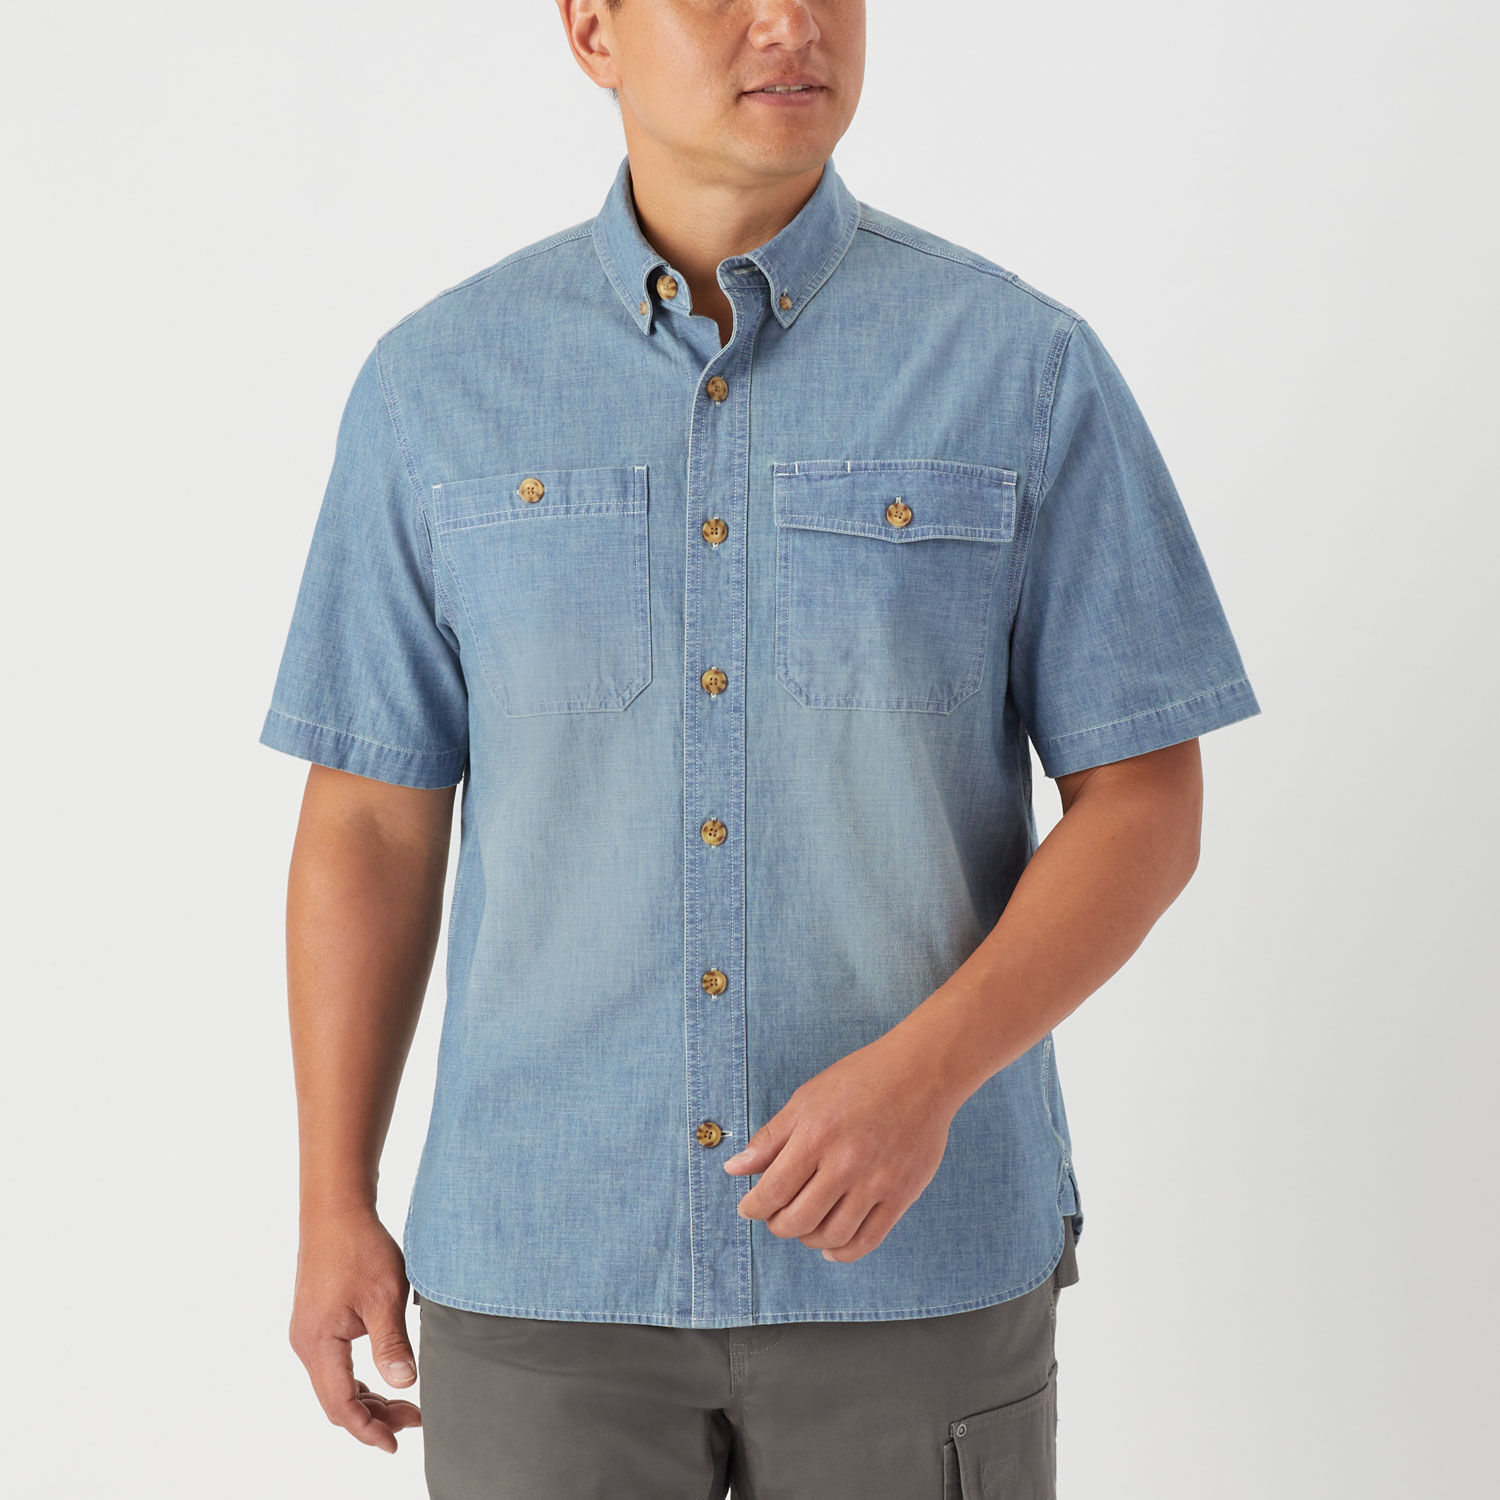 COOLMAX Chambray Standard Fit Short Sleeve Shirt | Duluth Trading